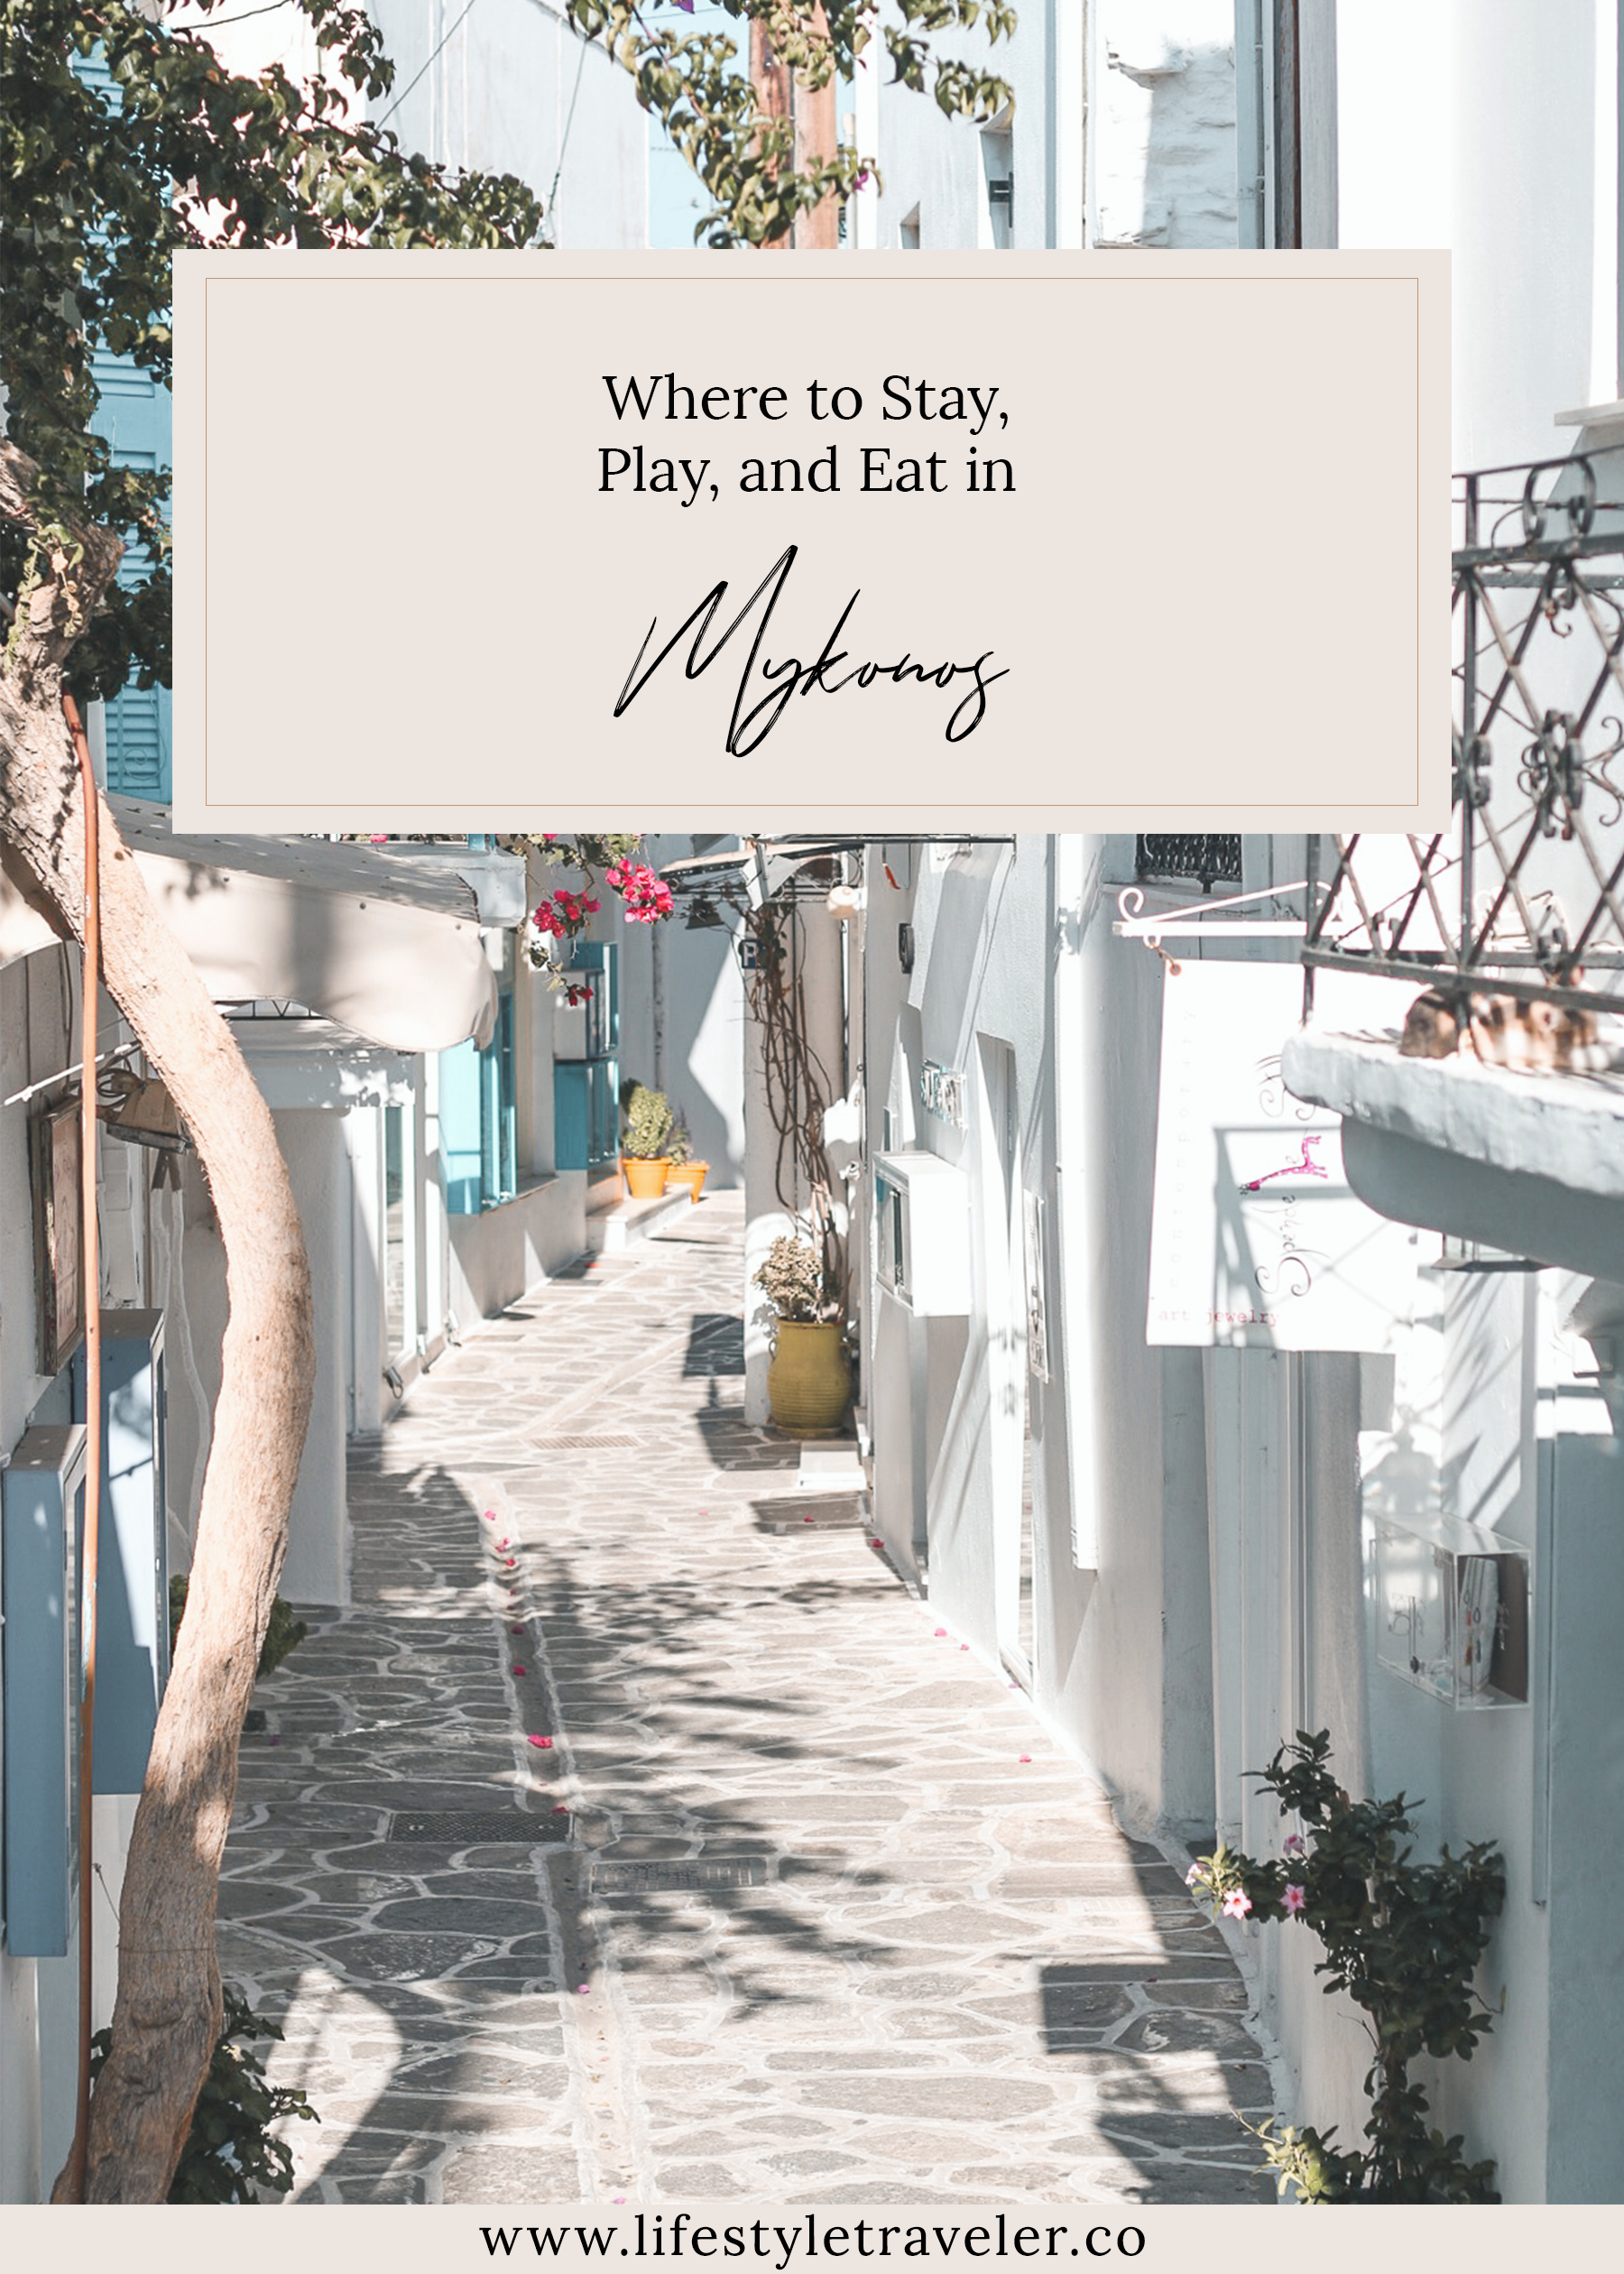 Summer in Mykonos - The Ultimate Leisure Guide | lifestyletraveler.co | IG: @lifestyletraveler.co